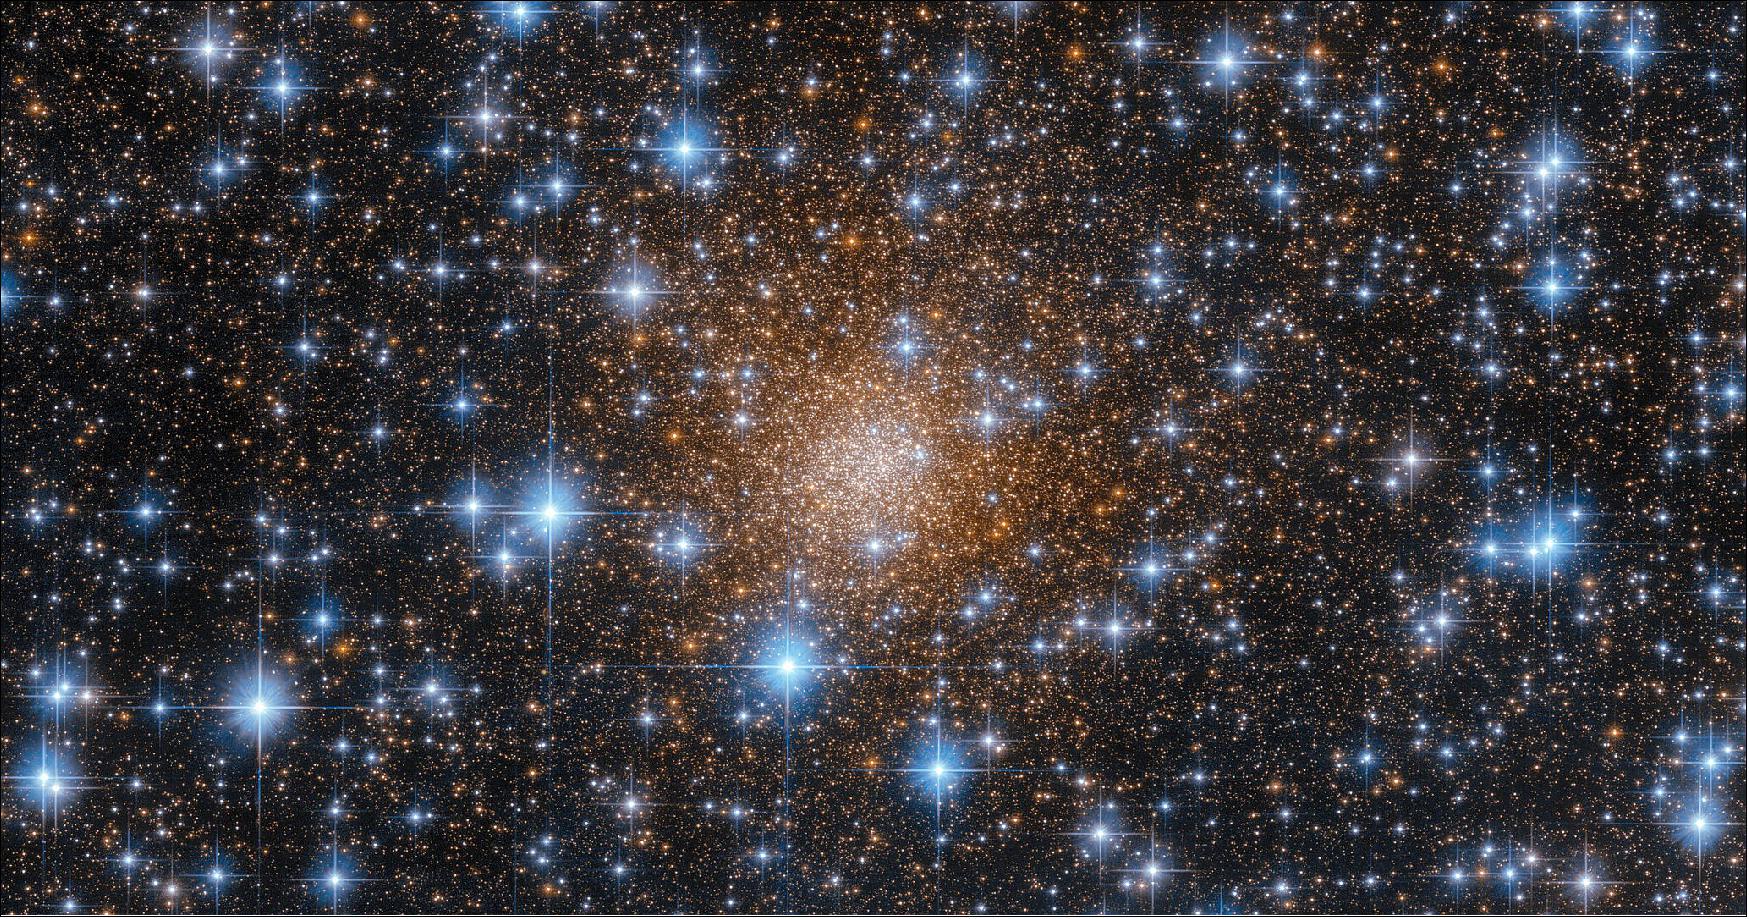 Figure 29: Liller 1 is a particularly interesting globular cluster, because unlike most of its kind, it contains a mix of very young and very old stars. Globular clusters typically house only old stars, some nearly as old as the Universe itself. Liller1 instead contains at least two distinct stellar populations with remarkably different ages: the oldest one is 12 billion years old and the youngest component is just 1-2 billion years old. This led astronomers to conclude that this stellar system was able to form stars over an extraordinary long period of time (image credit: ESA/Hubble & NASA, F. Ferraro; CC BY 4.0)